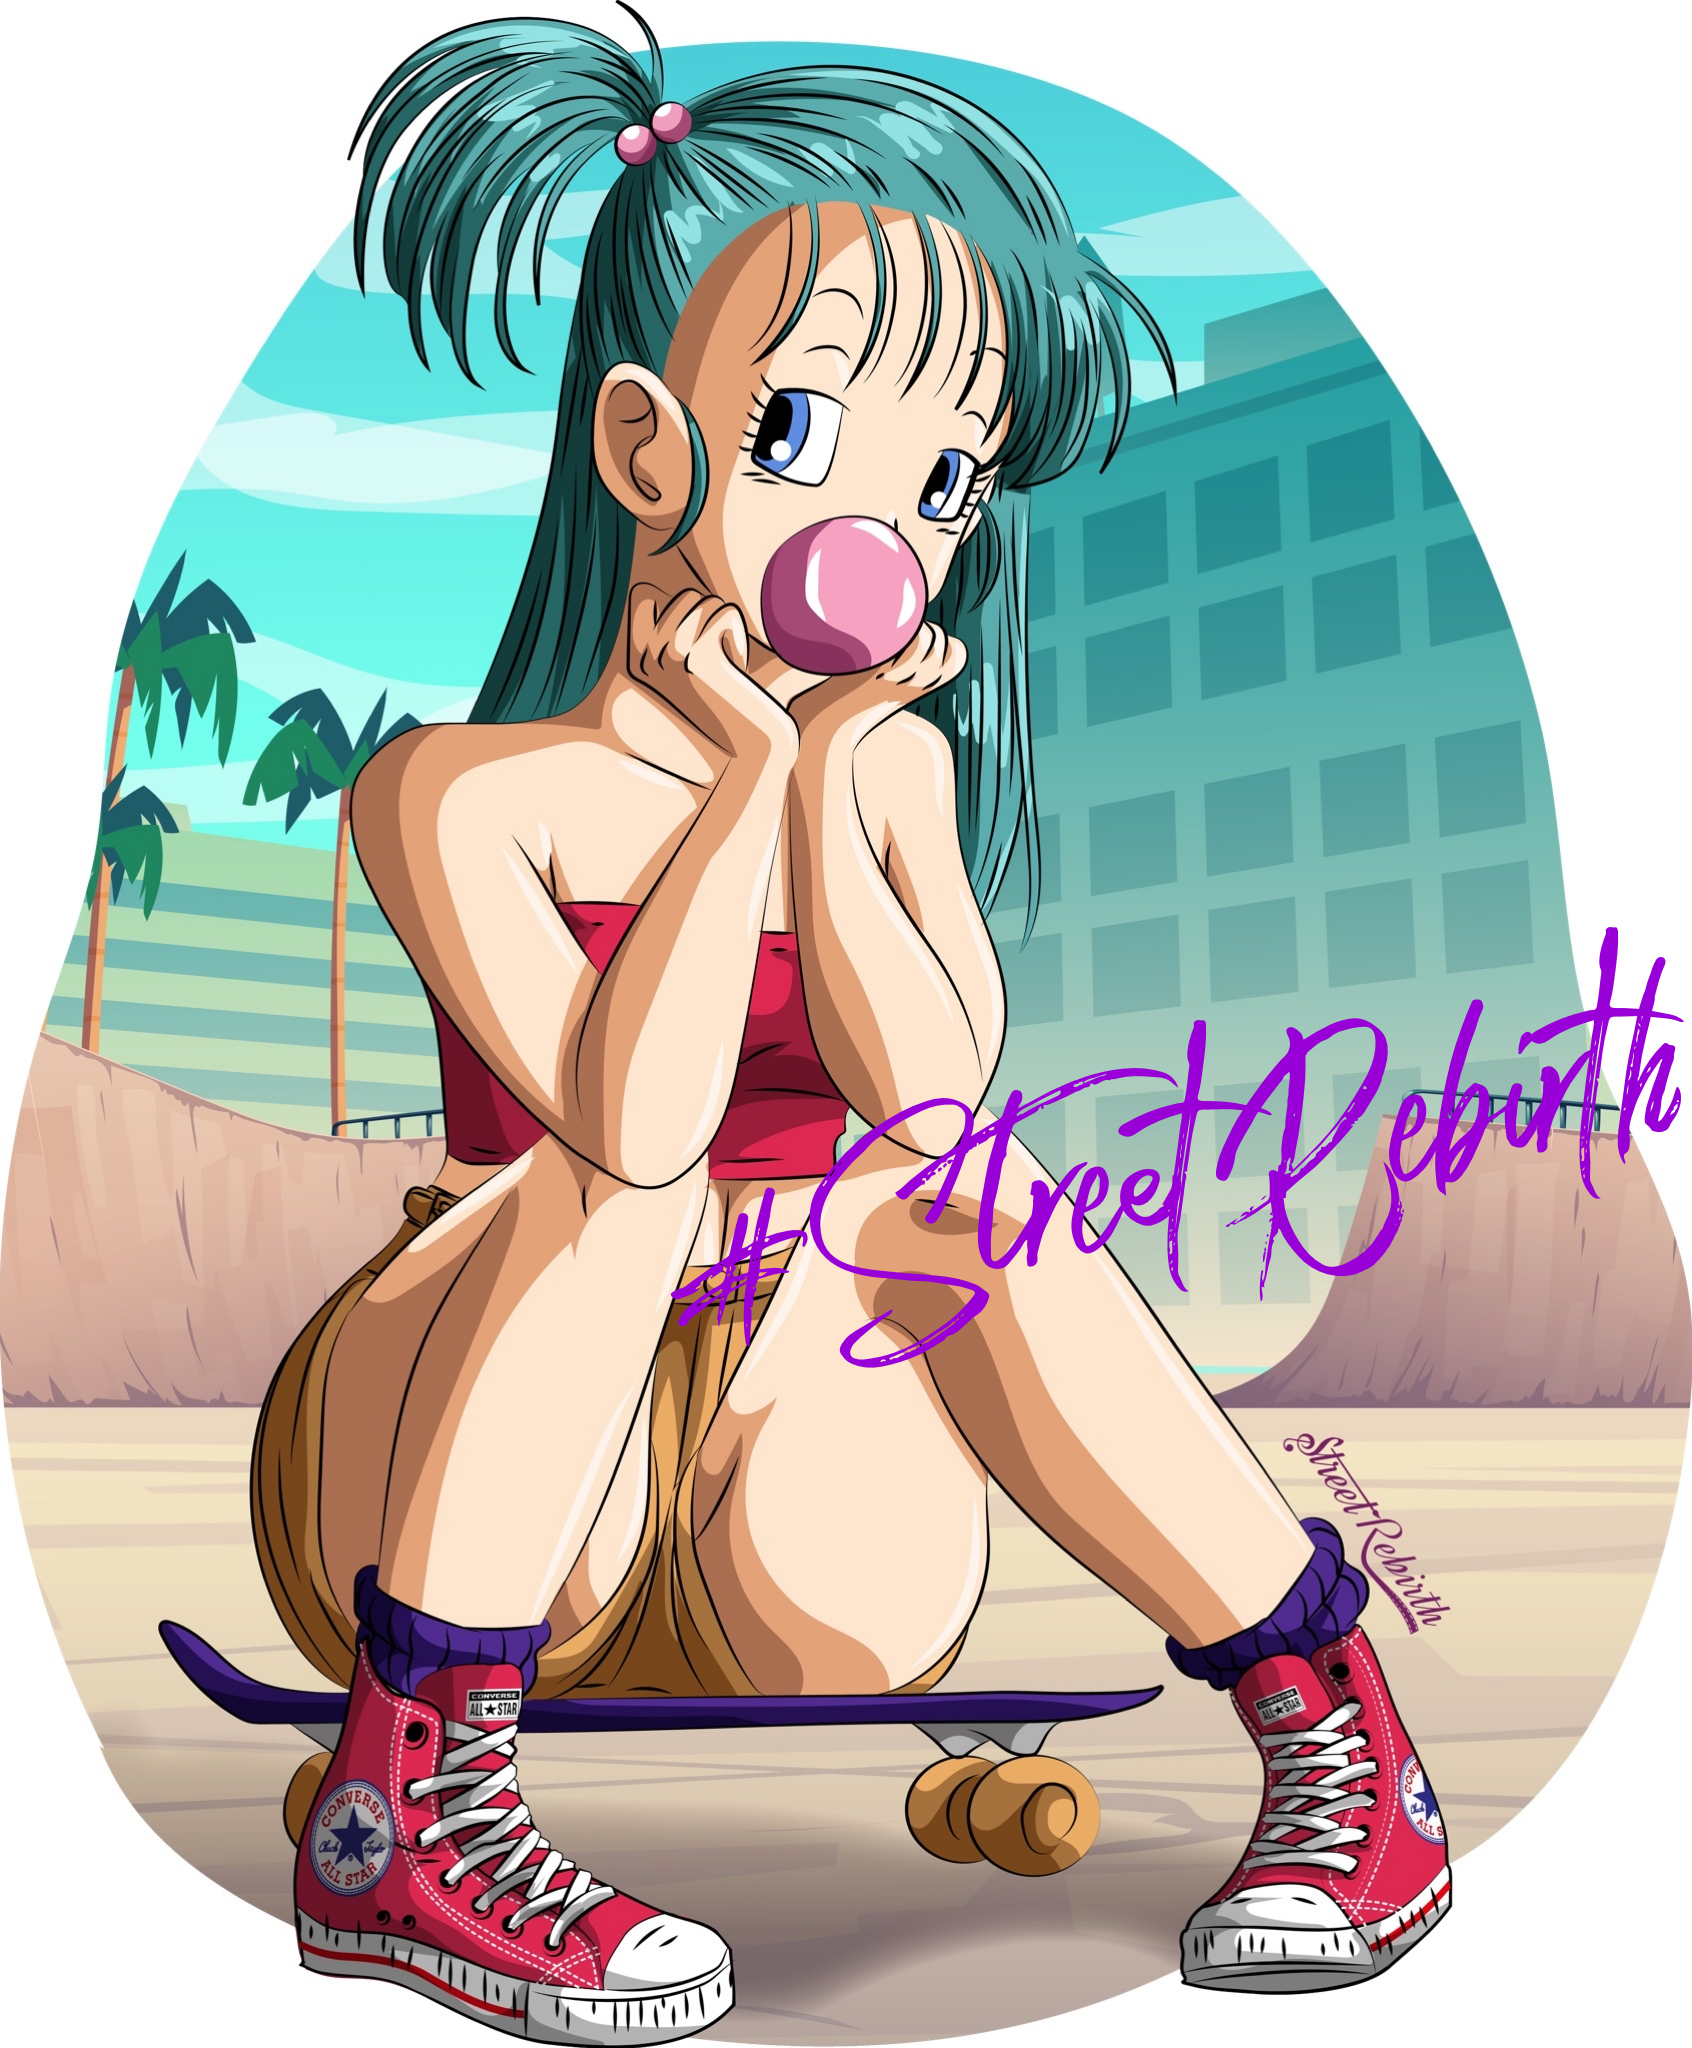 Bulma Skate Park Sticker – One 4 Inch Water Proof Vinyl Sticker – For Hydro Flask, Skateboard, Laptop, Planner, Car, Collecting, Gifting